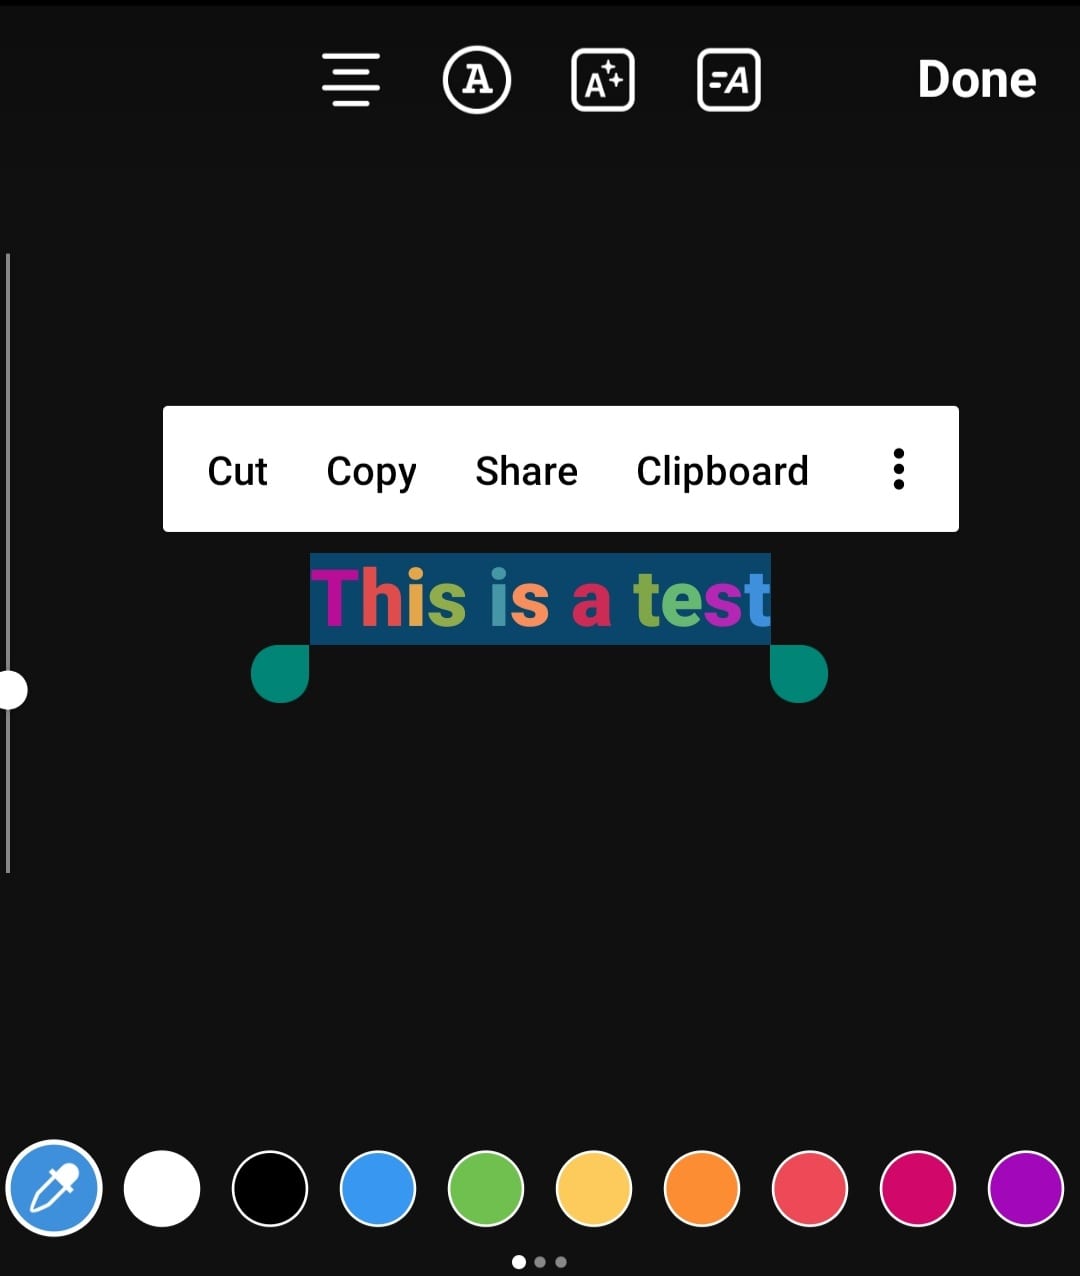 How to Write with All the Colors of the Rainbow on Instagram Stories